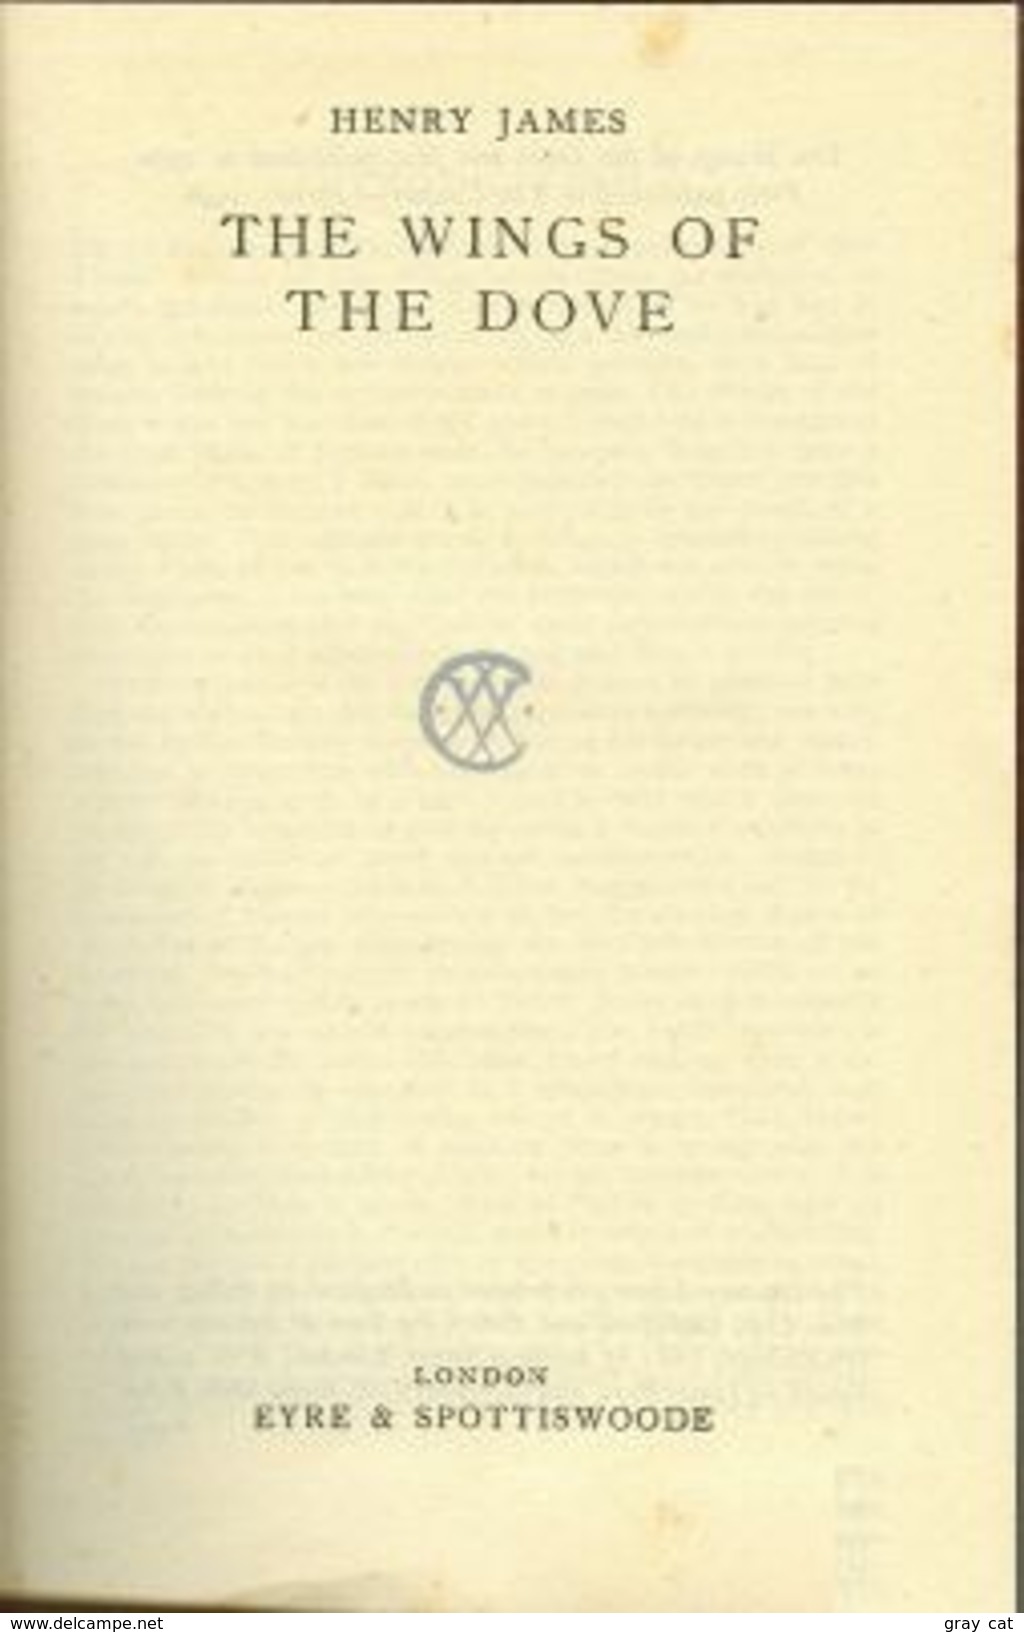 The Wings Of The Dove By Henry James With An Introduction By Herbert Read - 1900-1949